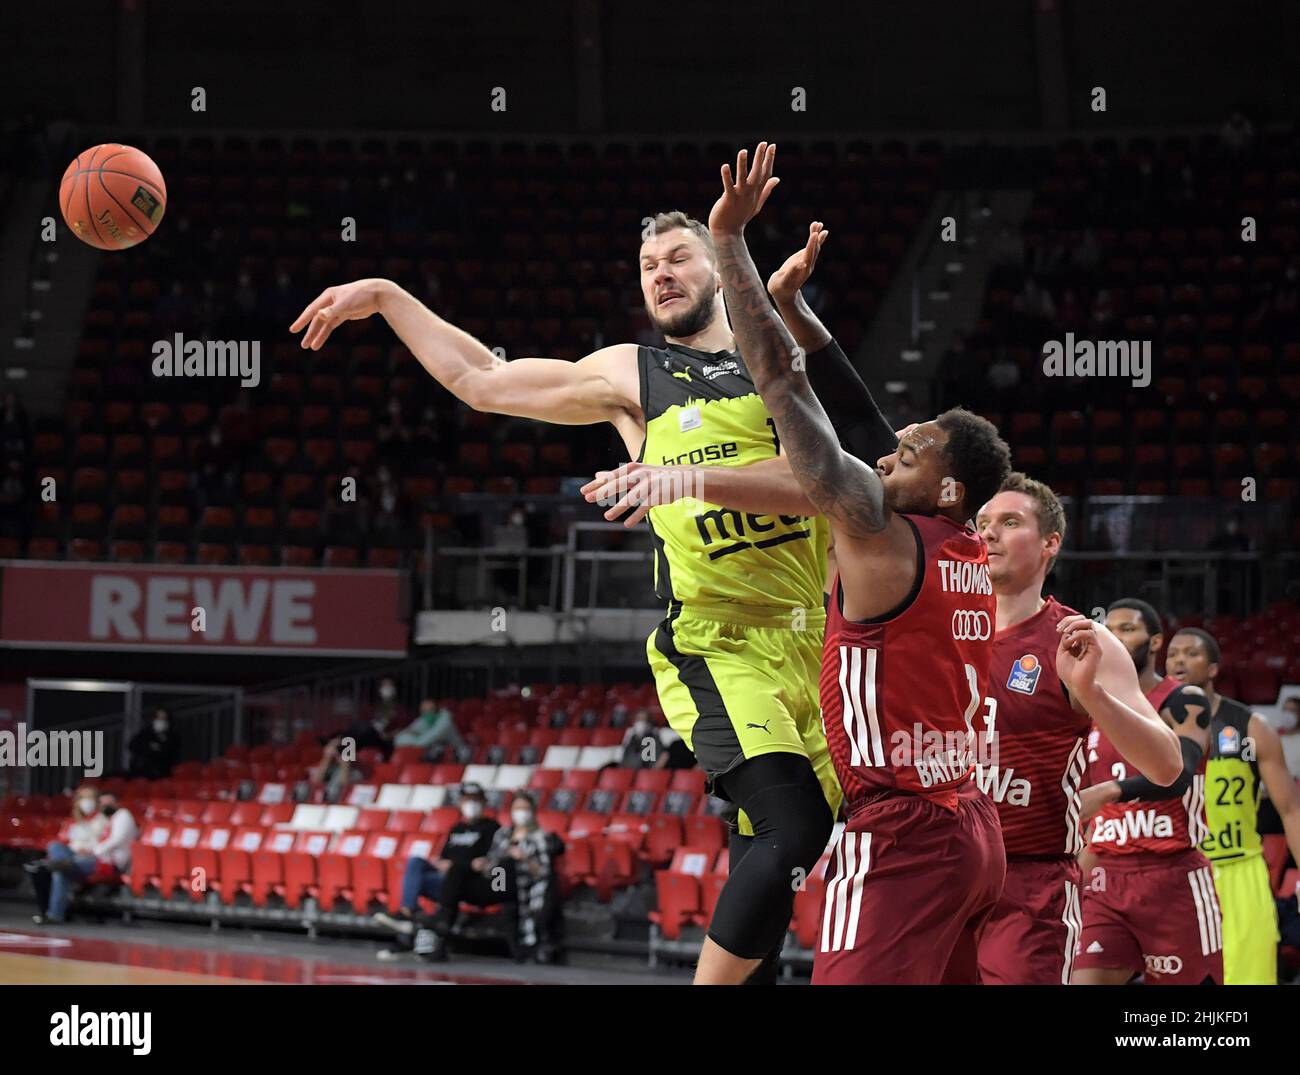 Muenchen, Deutschland (DE), 30 January, 2022. Pictured left to right, Martynas Sajus (medi Bayreuth), Deshaun Thomas (FC Bayern Basketball) at the Basketball BBL Bundesliga, FC Bayern Muenchen Basketball - medi Bayreuth. Credit: Eduard Martin/Alamy Live News Stock Photo